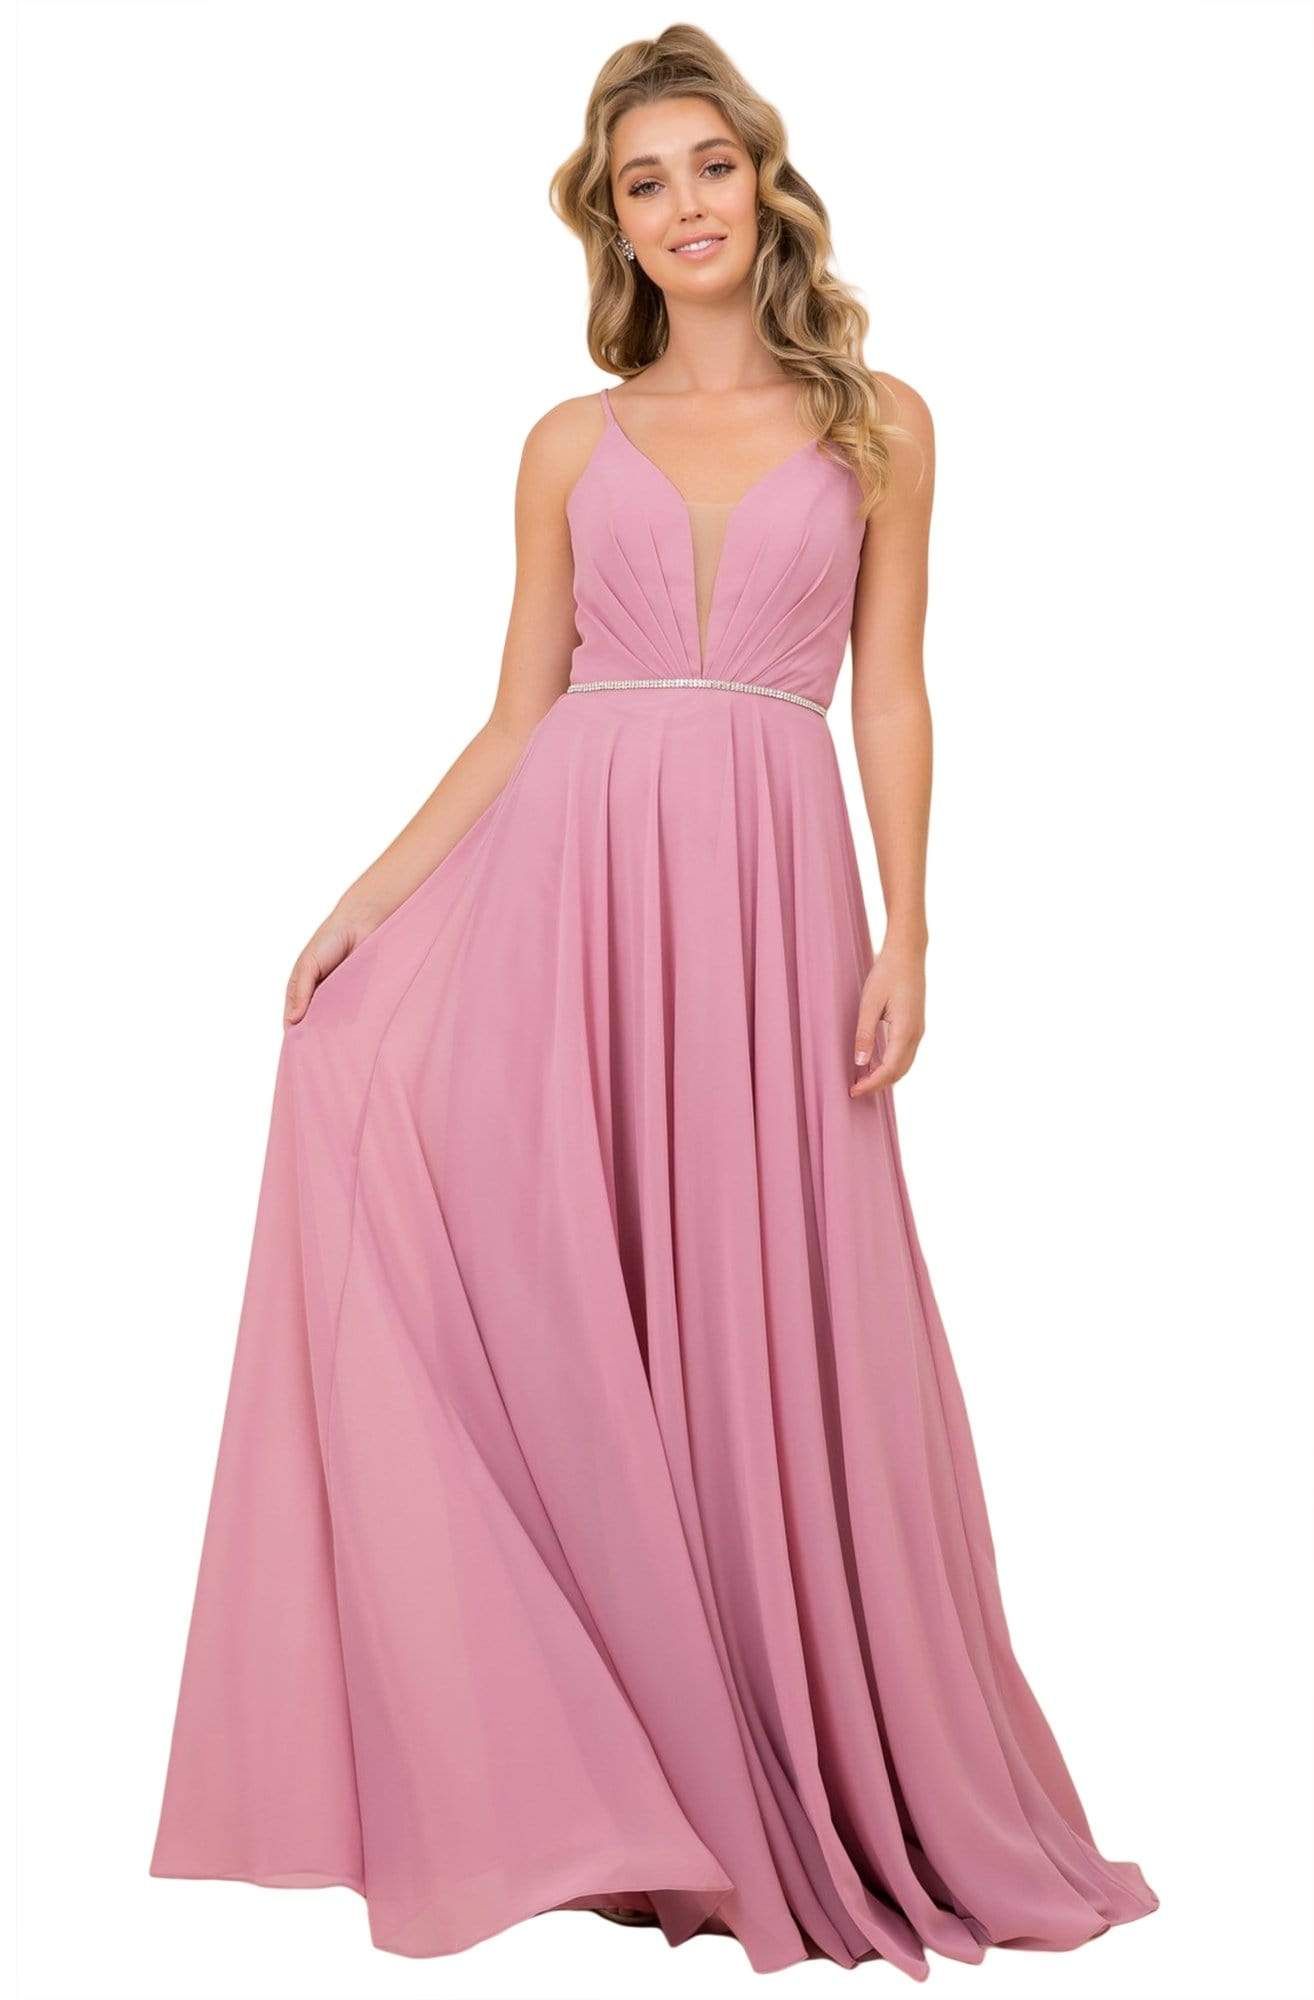 Image of Nox Anabel - R416 Lace-up Open Back Beaded Waist A-Line Prom Dress